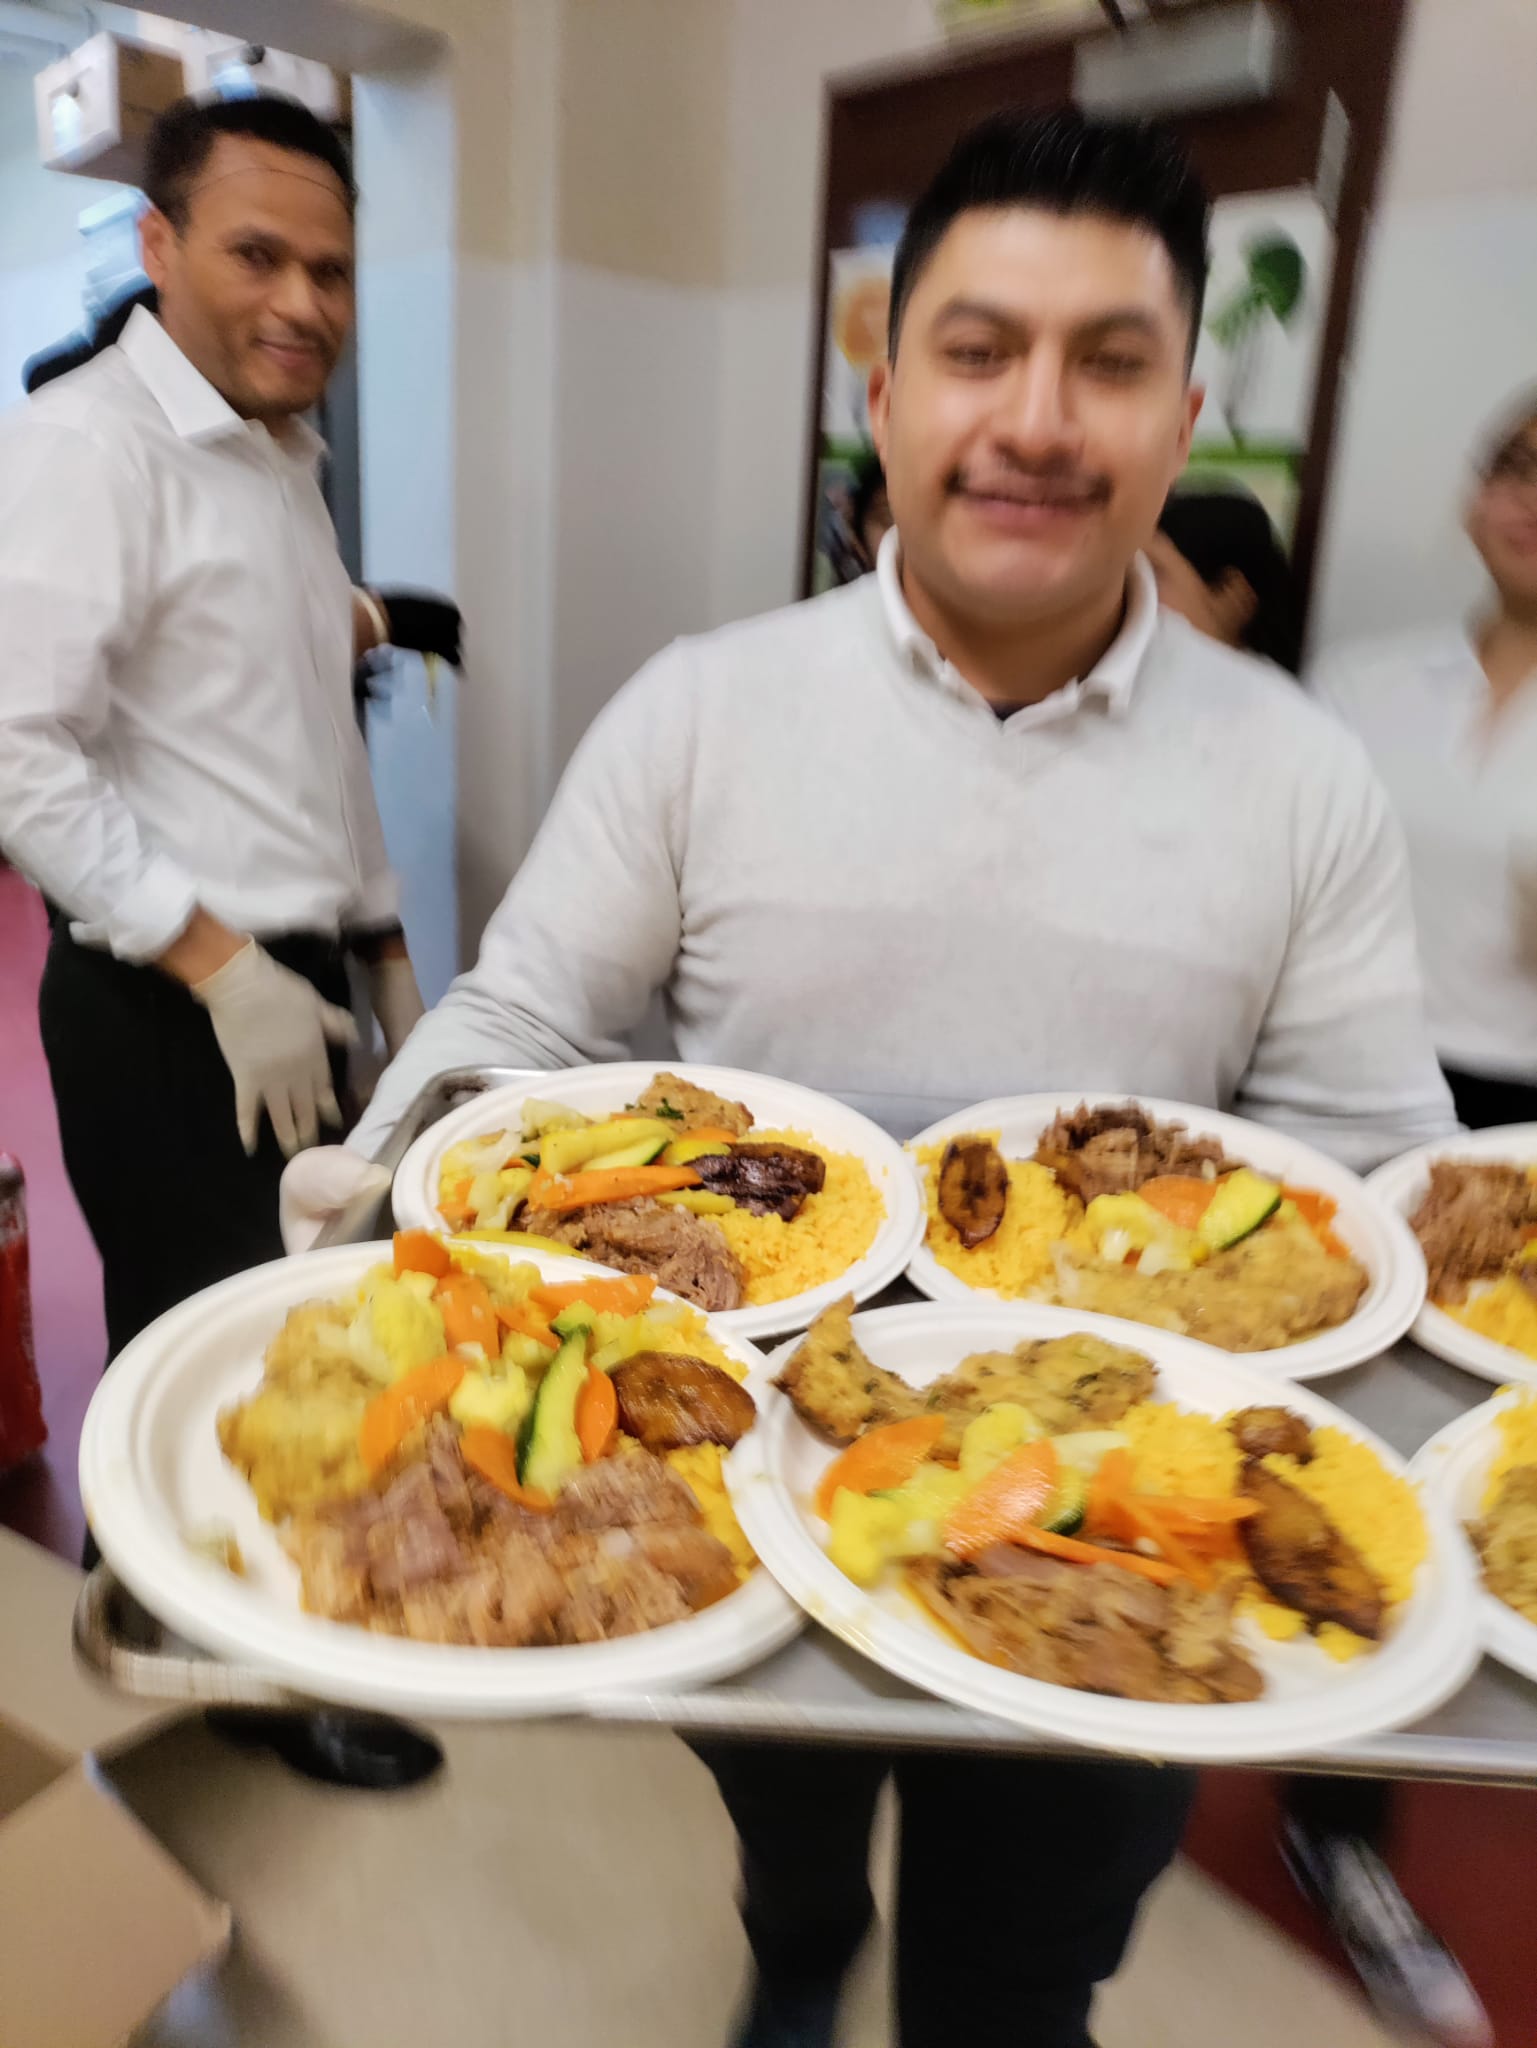 A man holding plates of food in front of him.